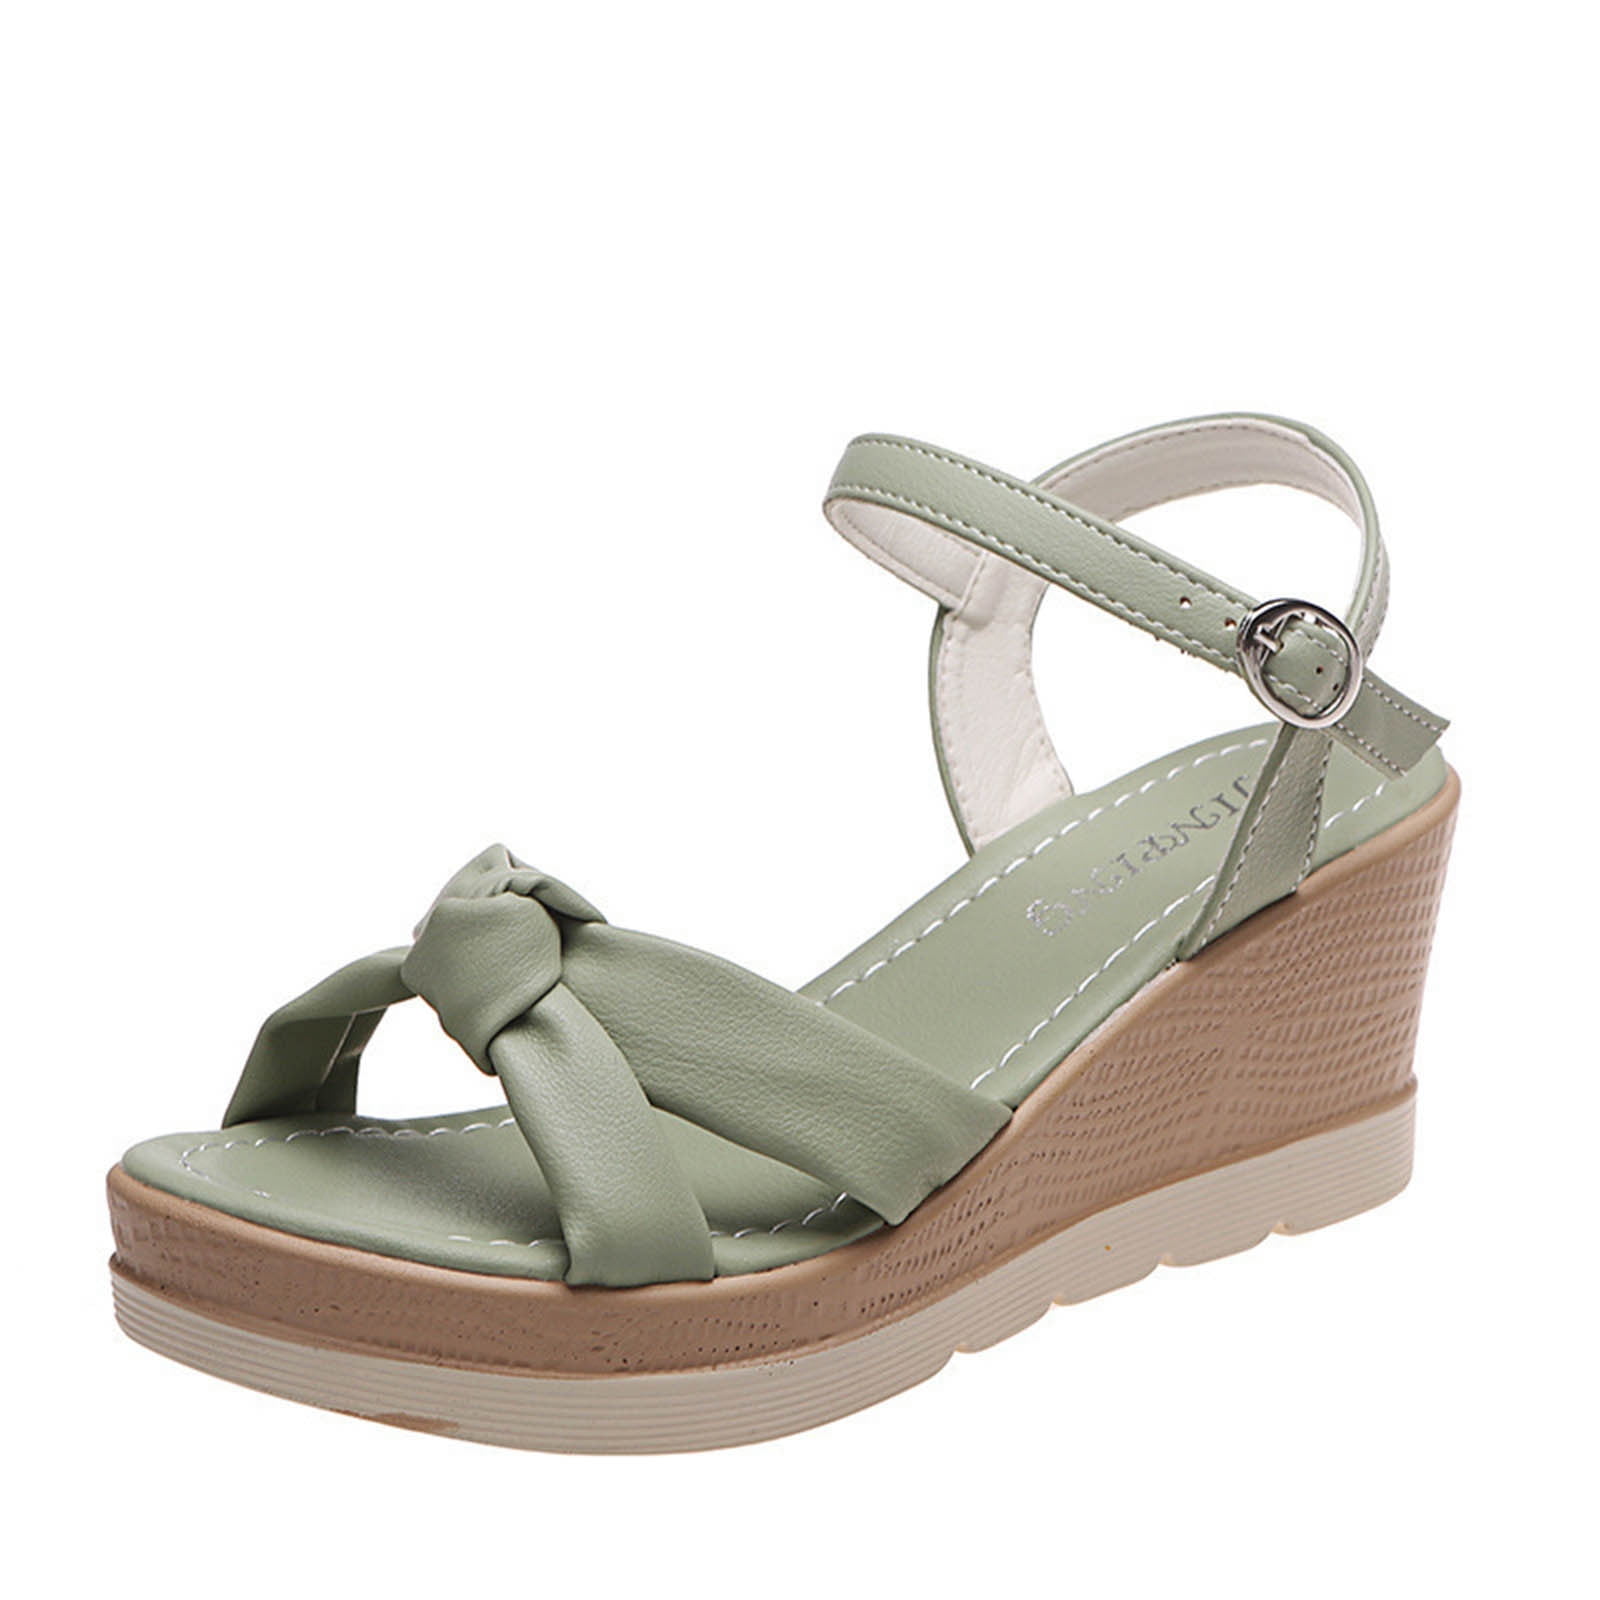 Juebong Wedge Sandals for Womens Dressy Summer Open Toe Ankle Strap ...